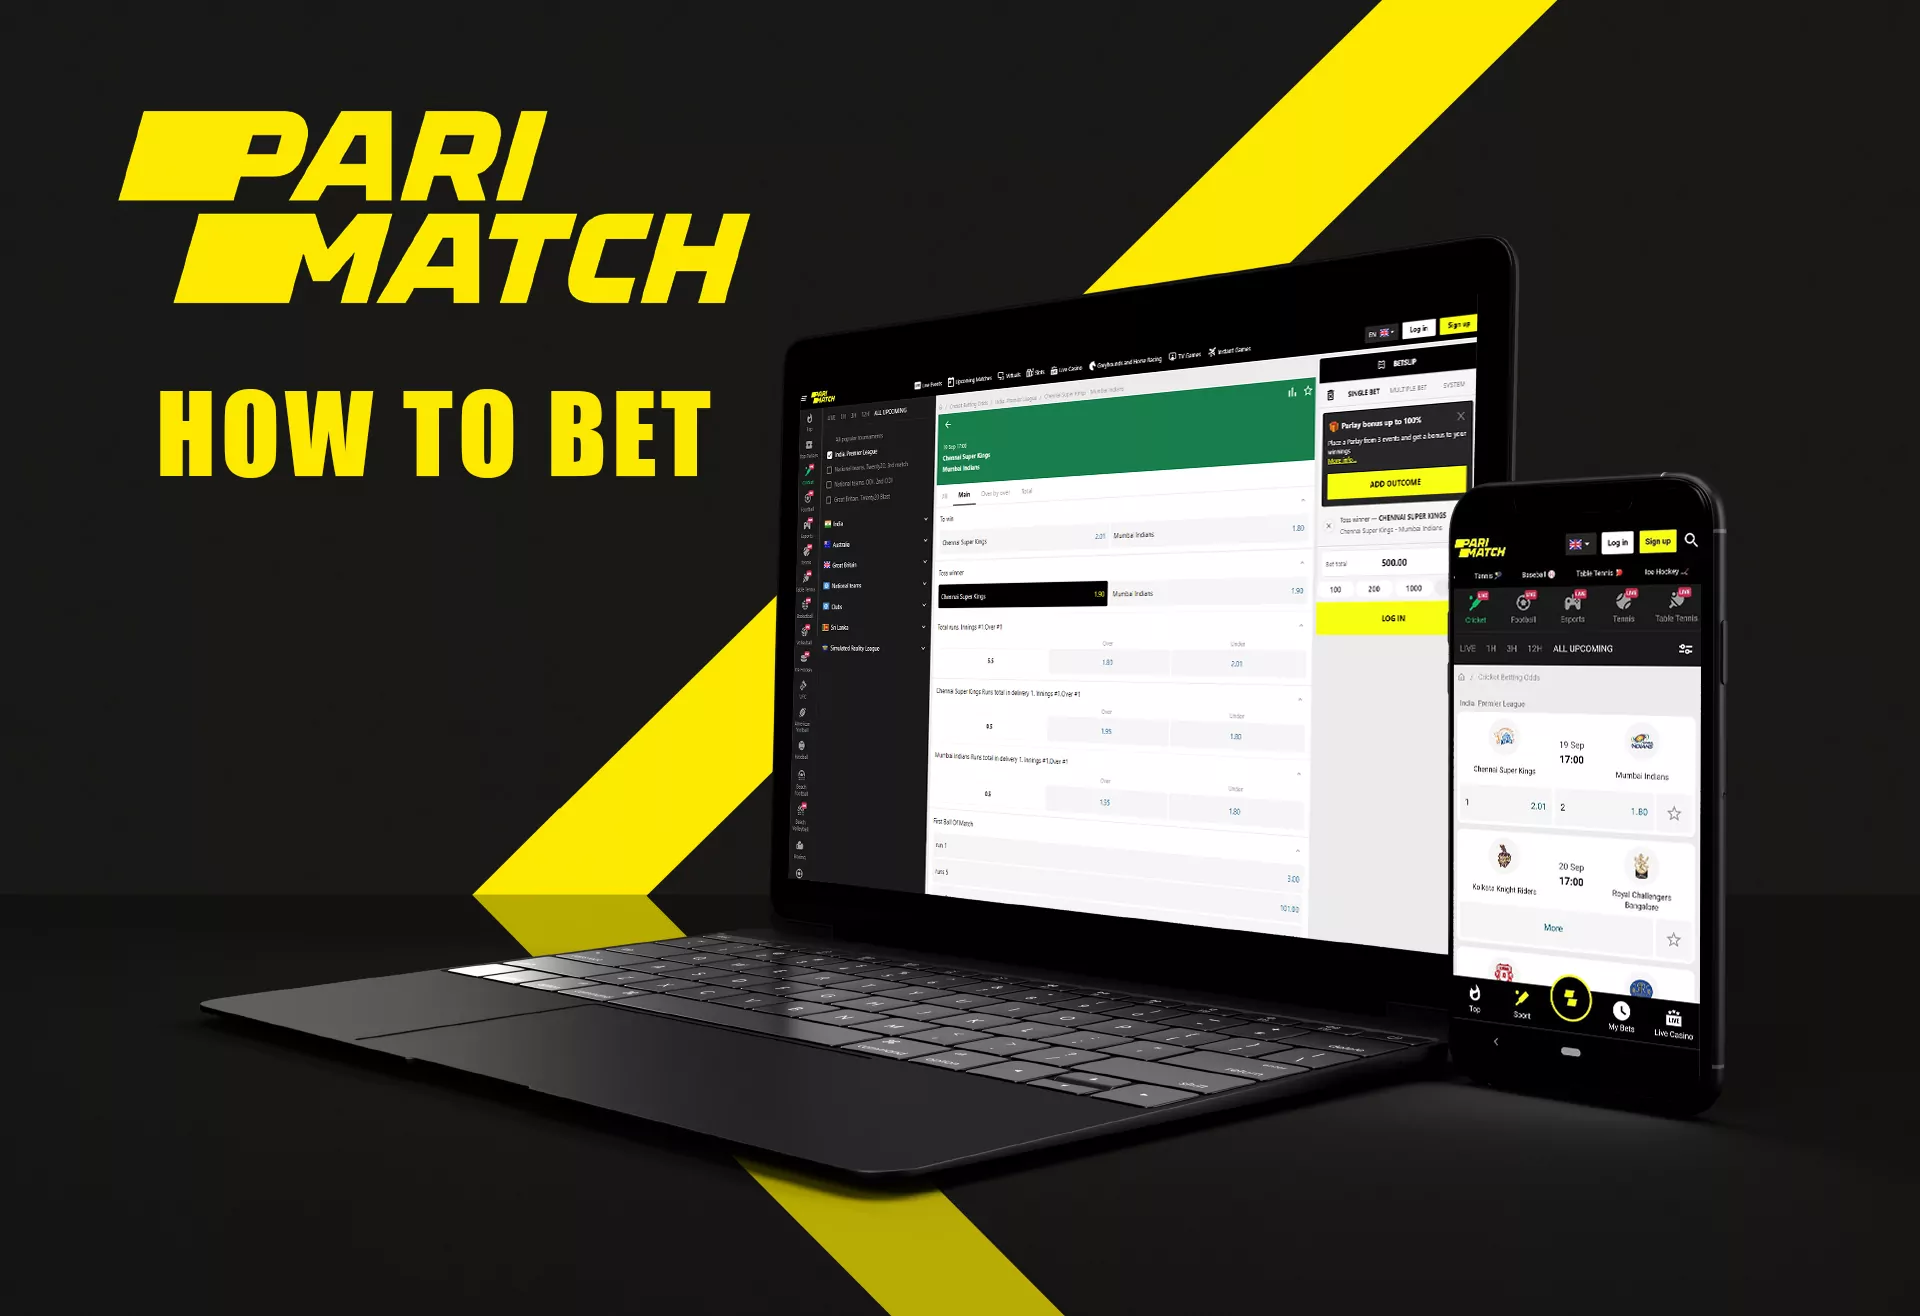 Both website and mobile apps are available for betting anytime and anywhere.